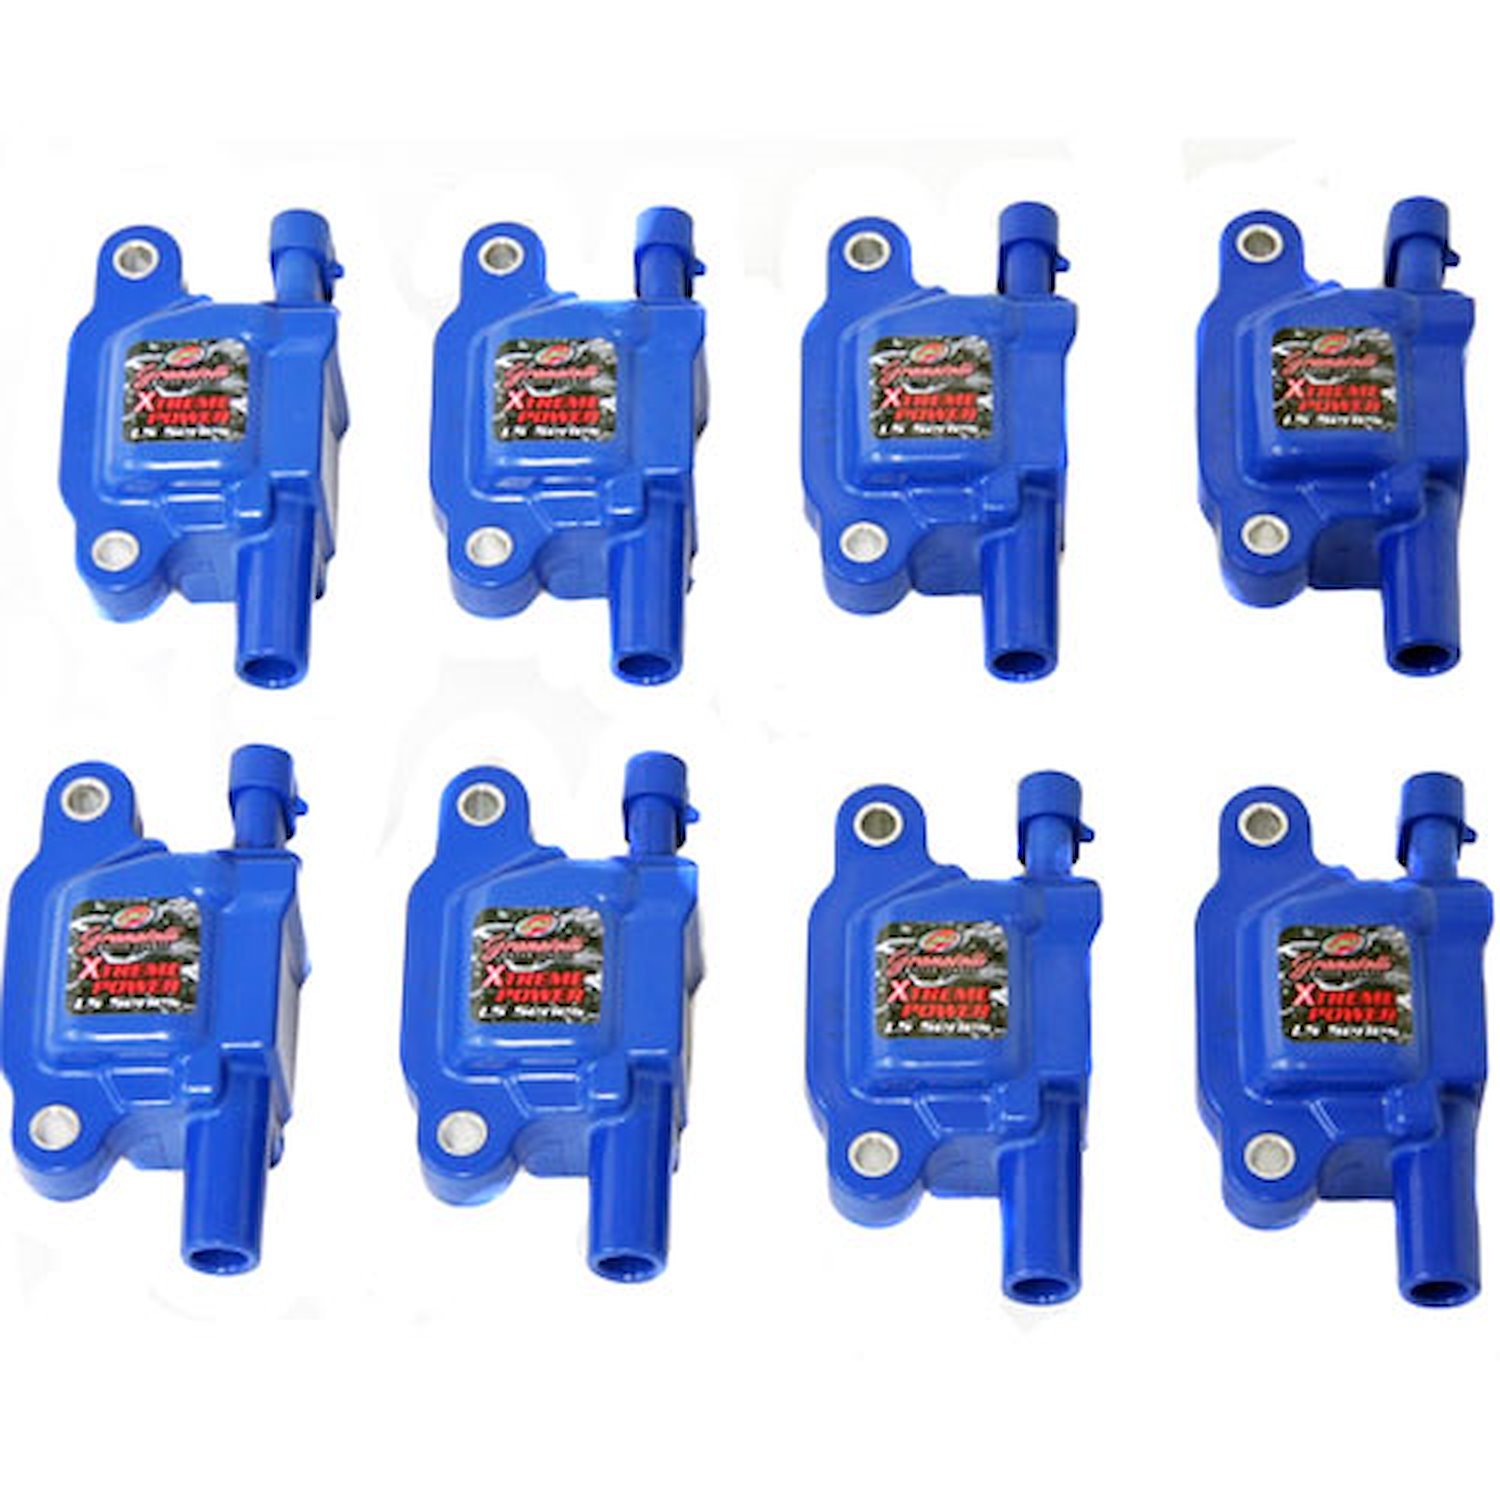 Pro Series Extreme Coil Packs